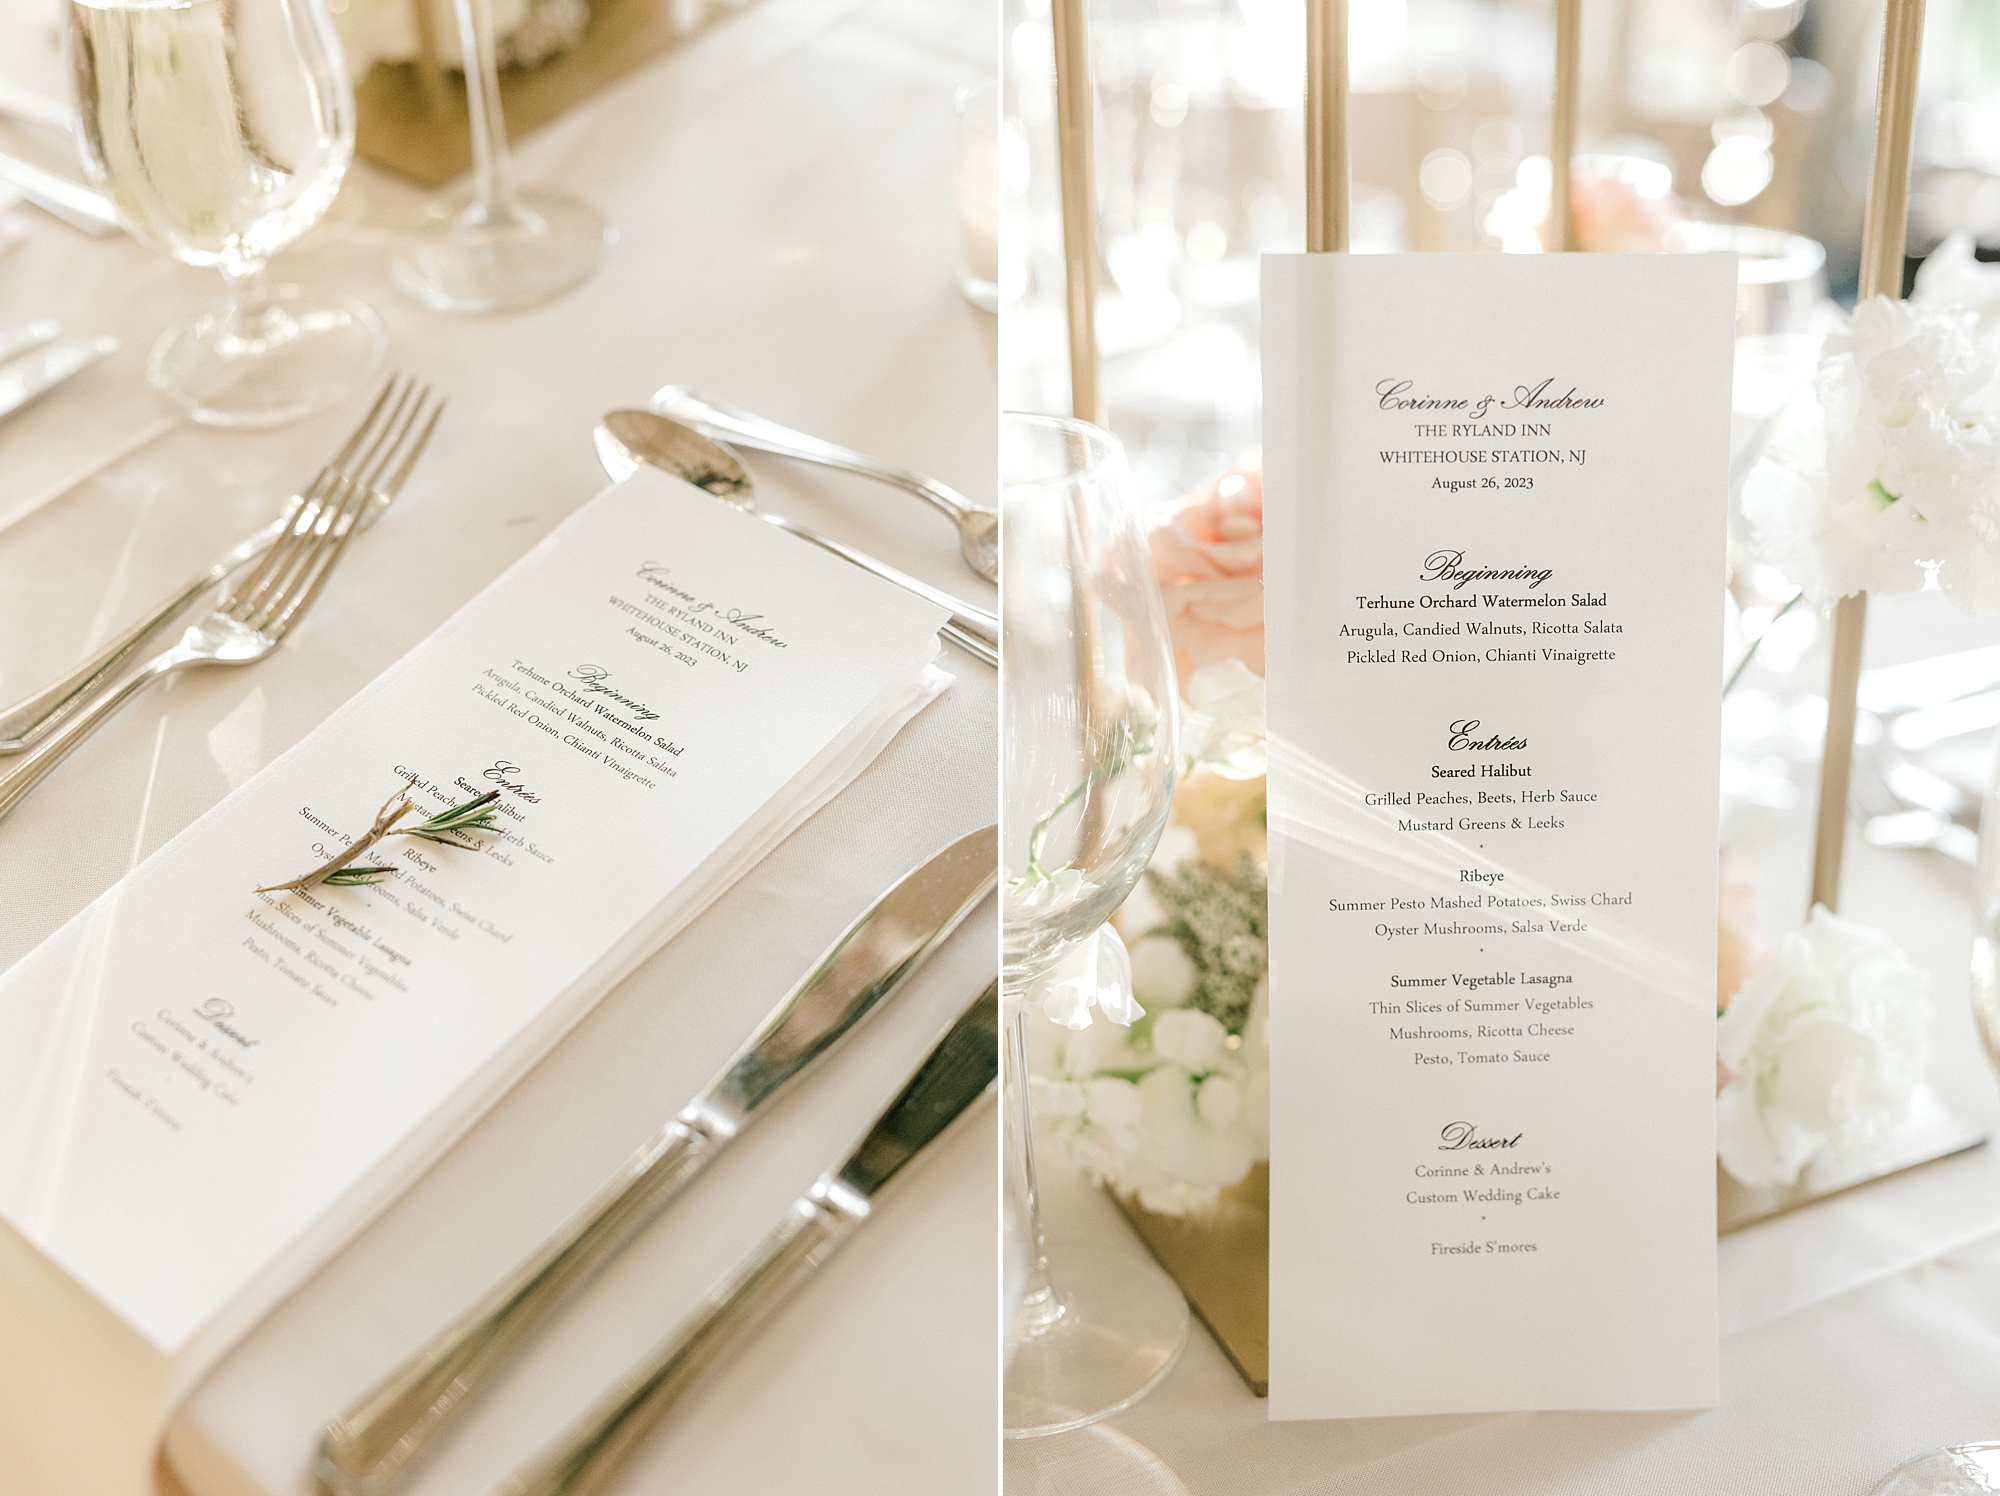 menu card with herb for place setting during luxurious summer wedding reception at Ryland Inn